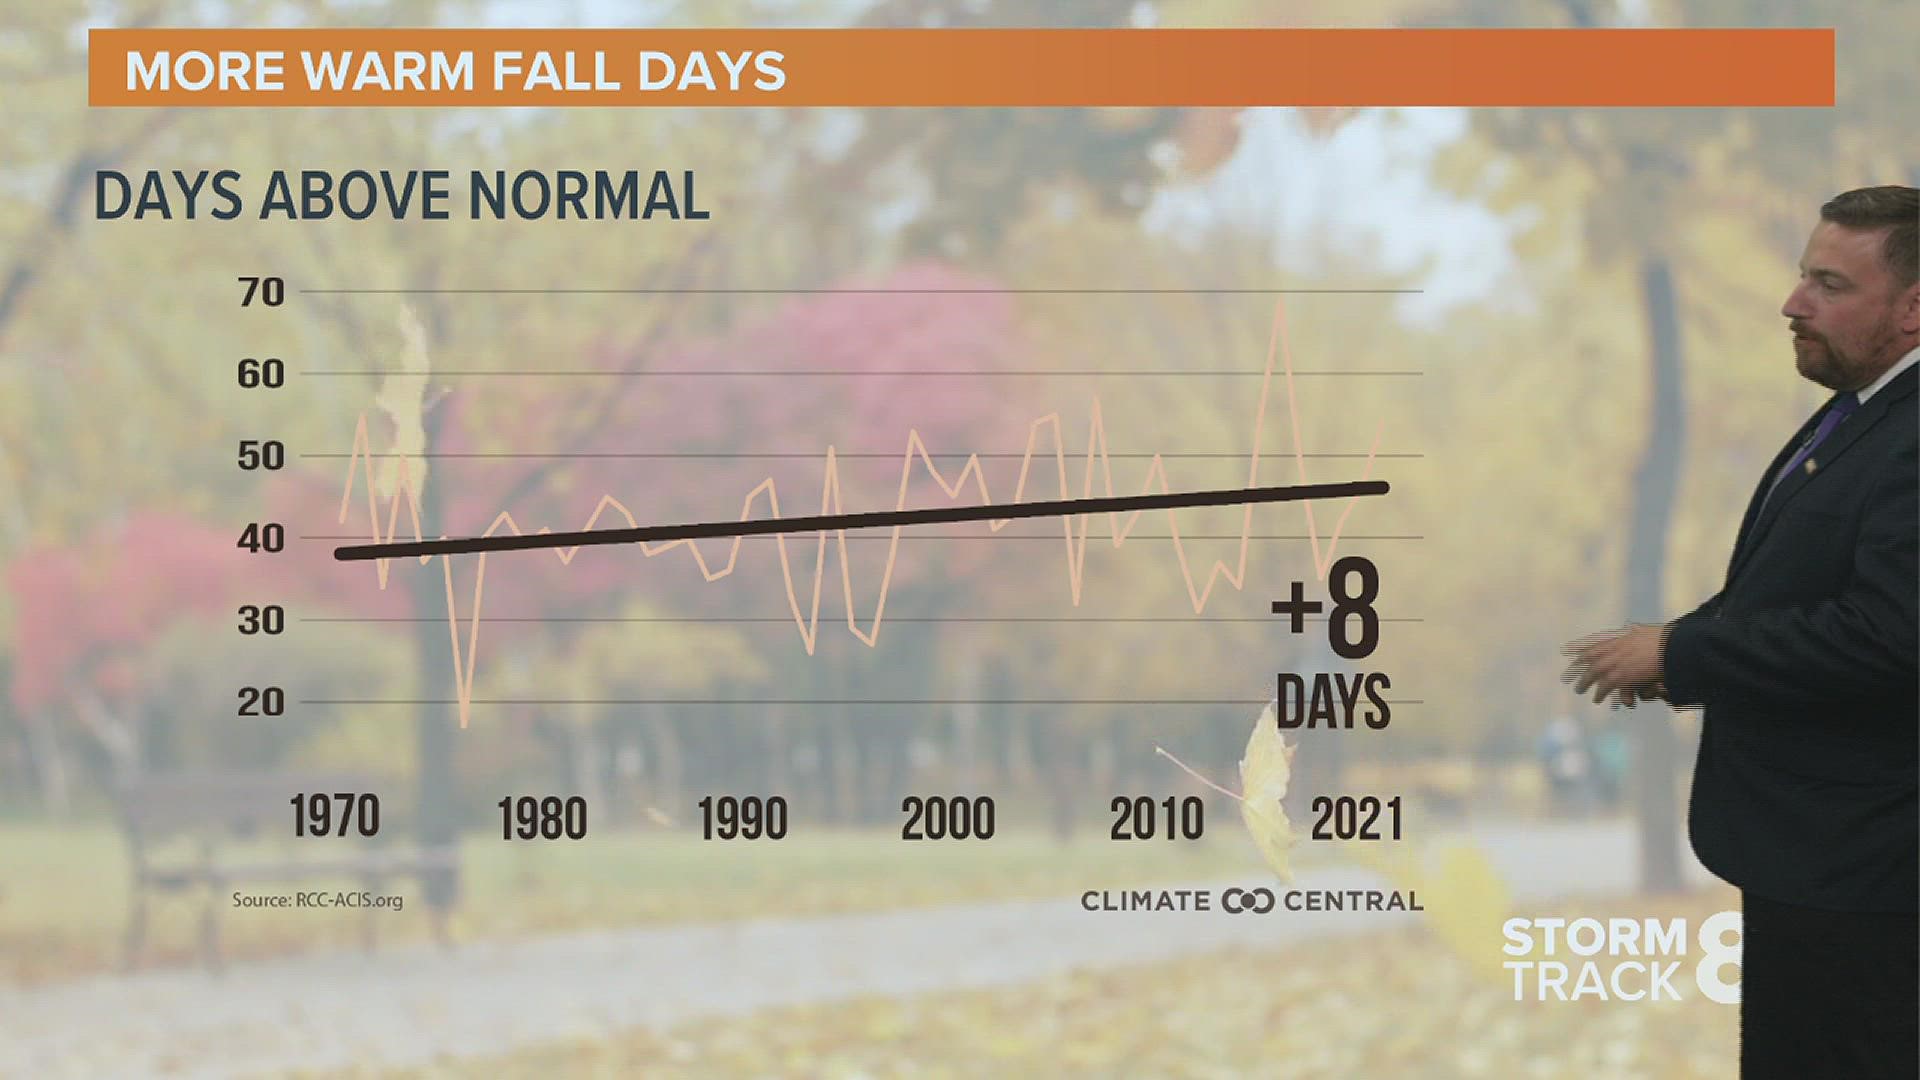 Climate data suggests that the fall season is not only warming but also getting longer.